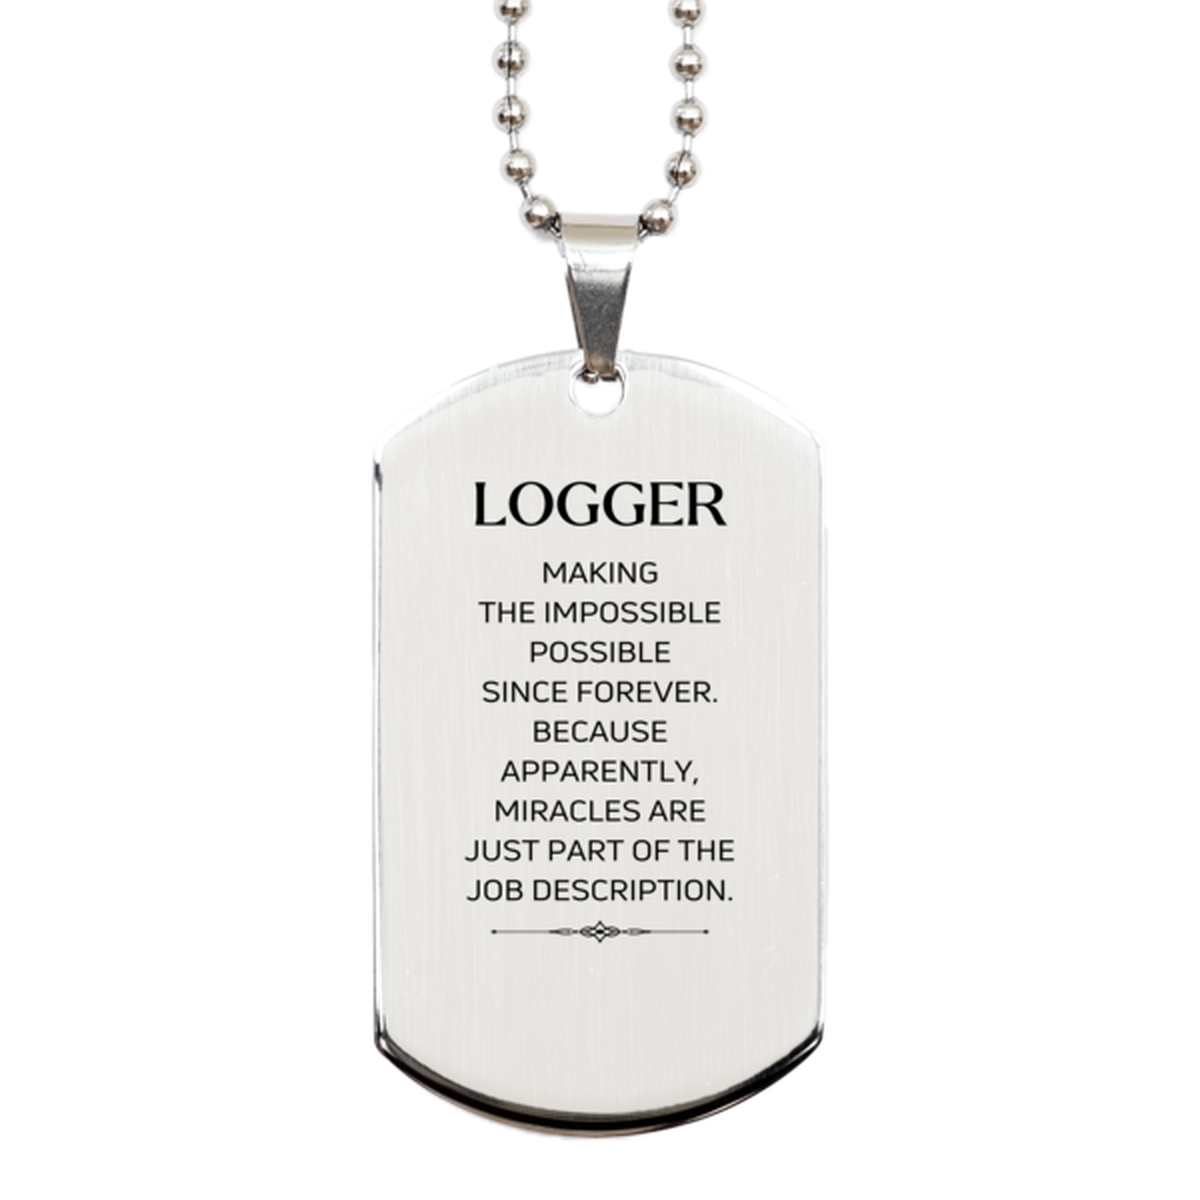 Funny Logger Gifts, Miracles are just part of the job description, Inspirational Birthday Silver Dog Tag For Logger, Men, Women, Coworkers, Friends, Boss